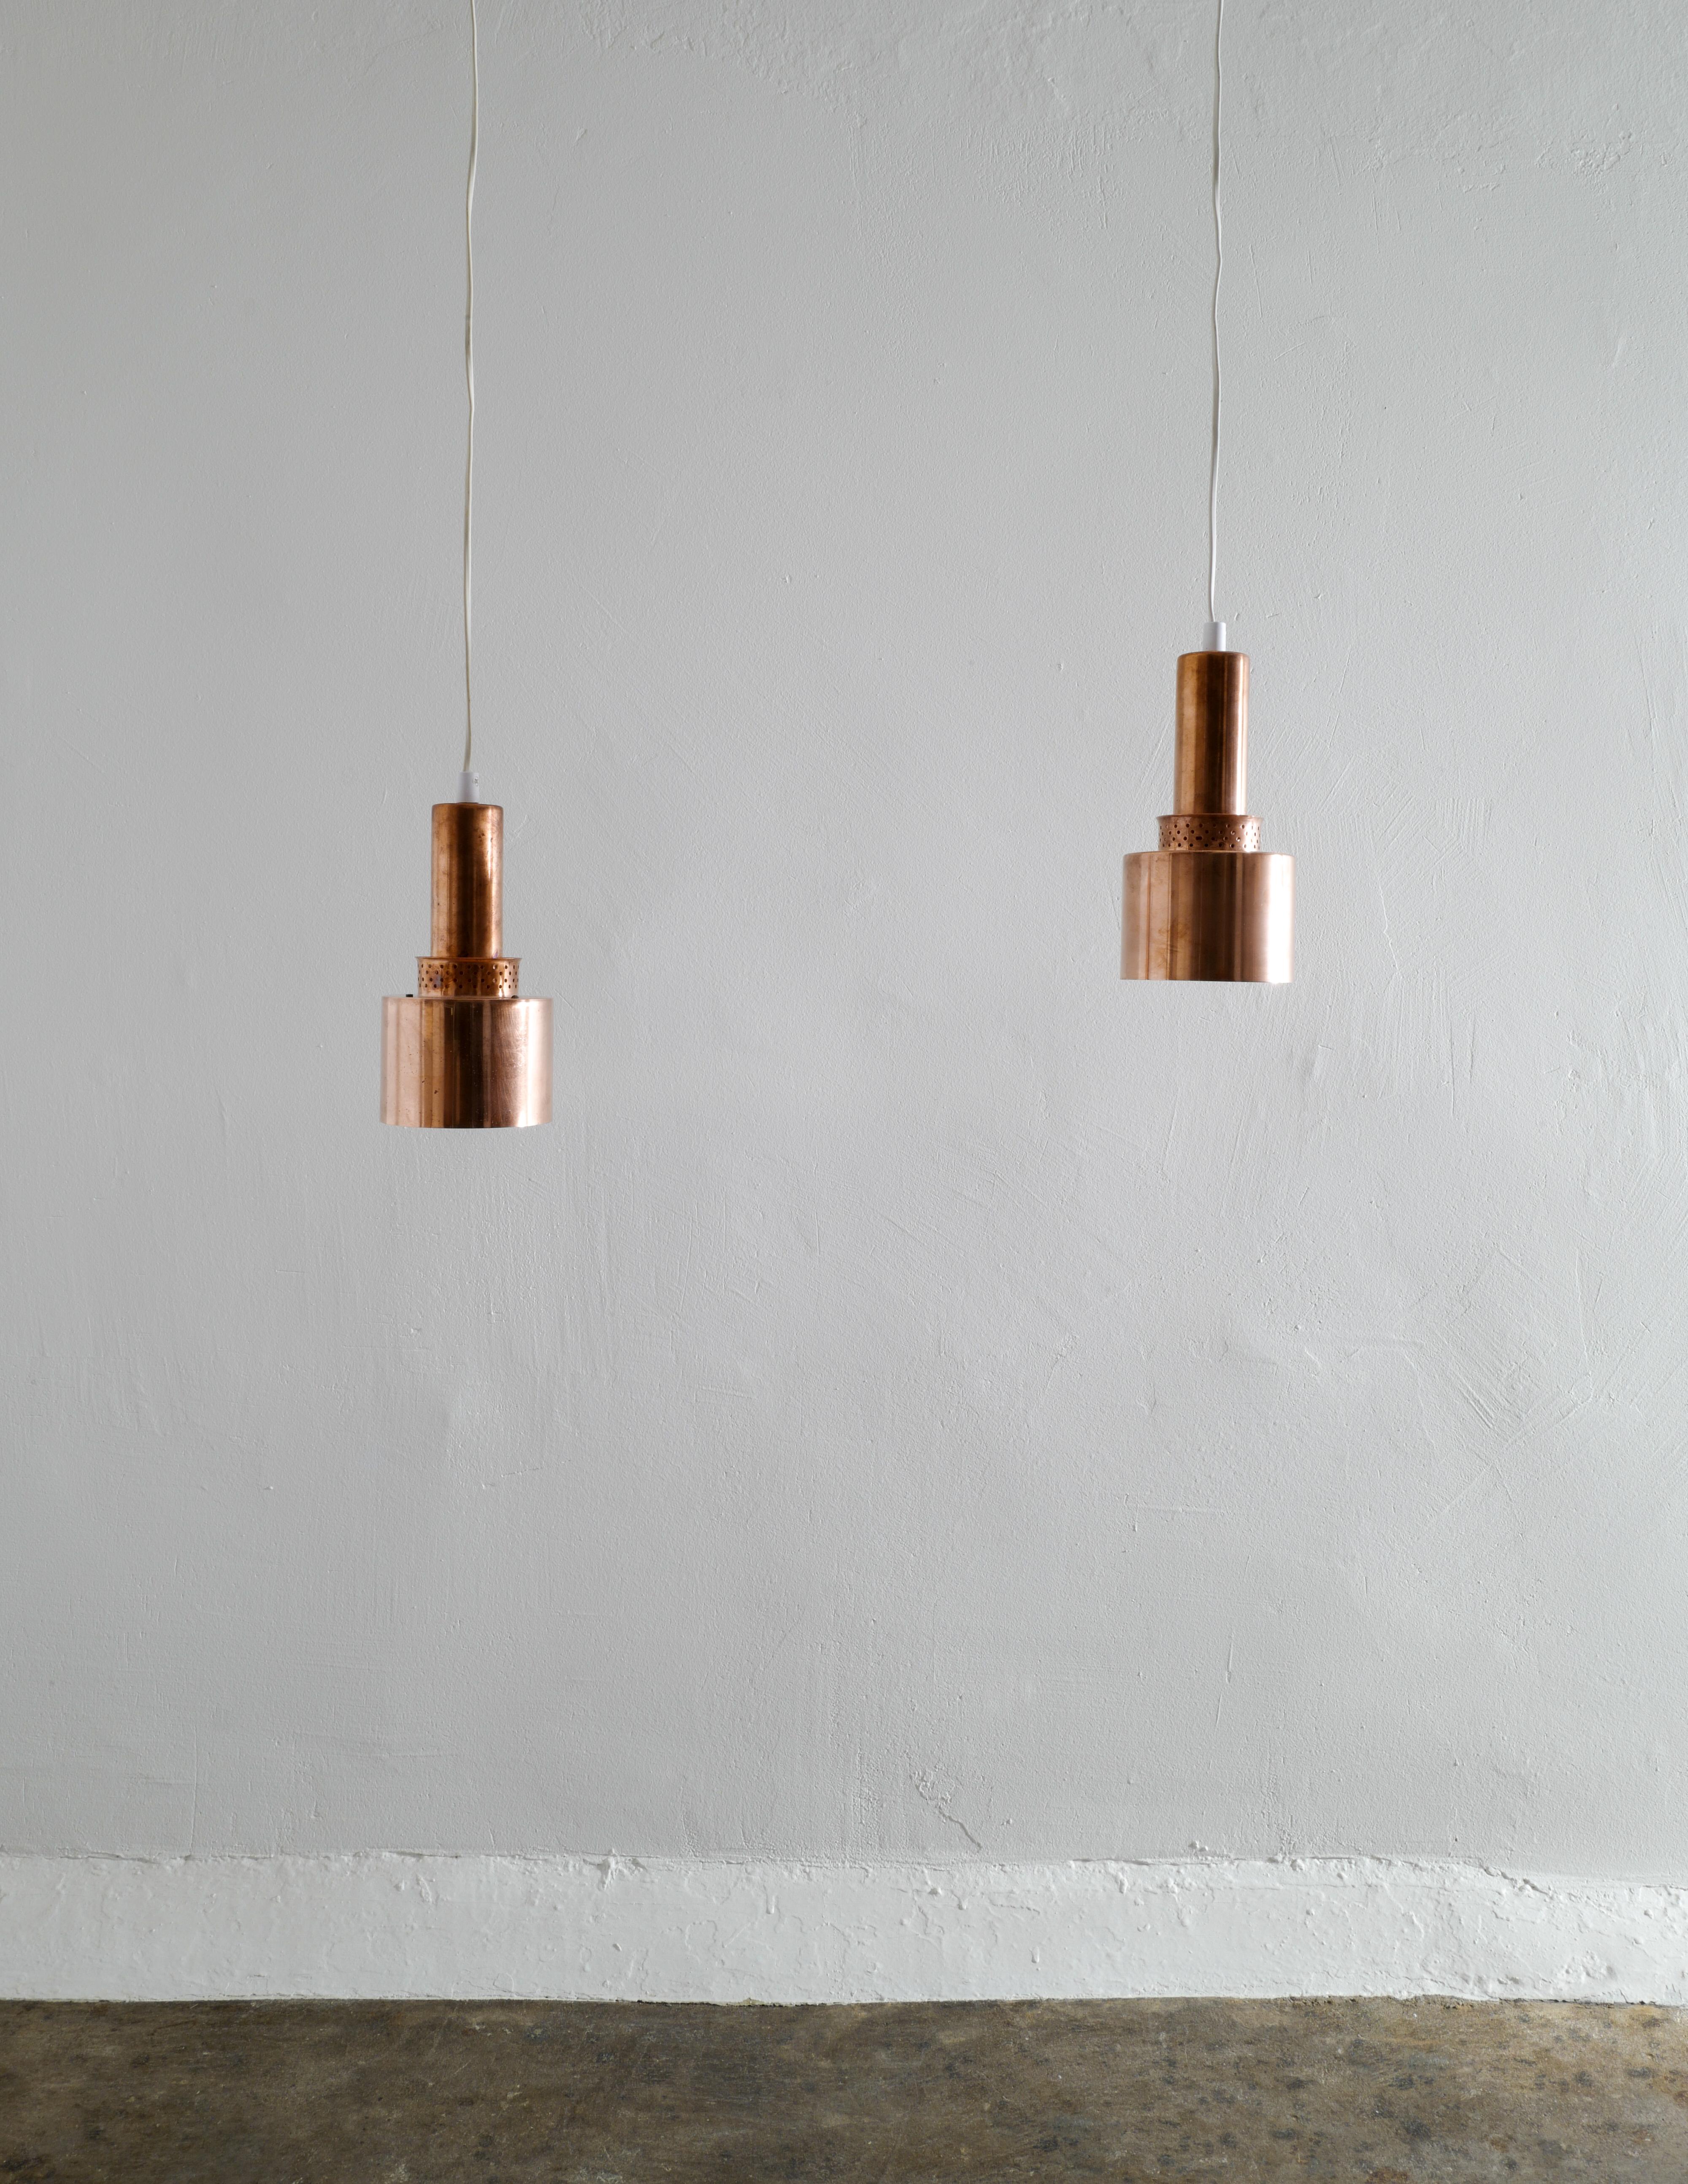 Rare copper pendant designed by Hans-Agne Jakobsson in 1958 and produced in the late 1950s or early 1960s. In good vintage and original condition showing beautiful patina from age and use. Newer wiring. 

Four pendants available. 

Measurements: